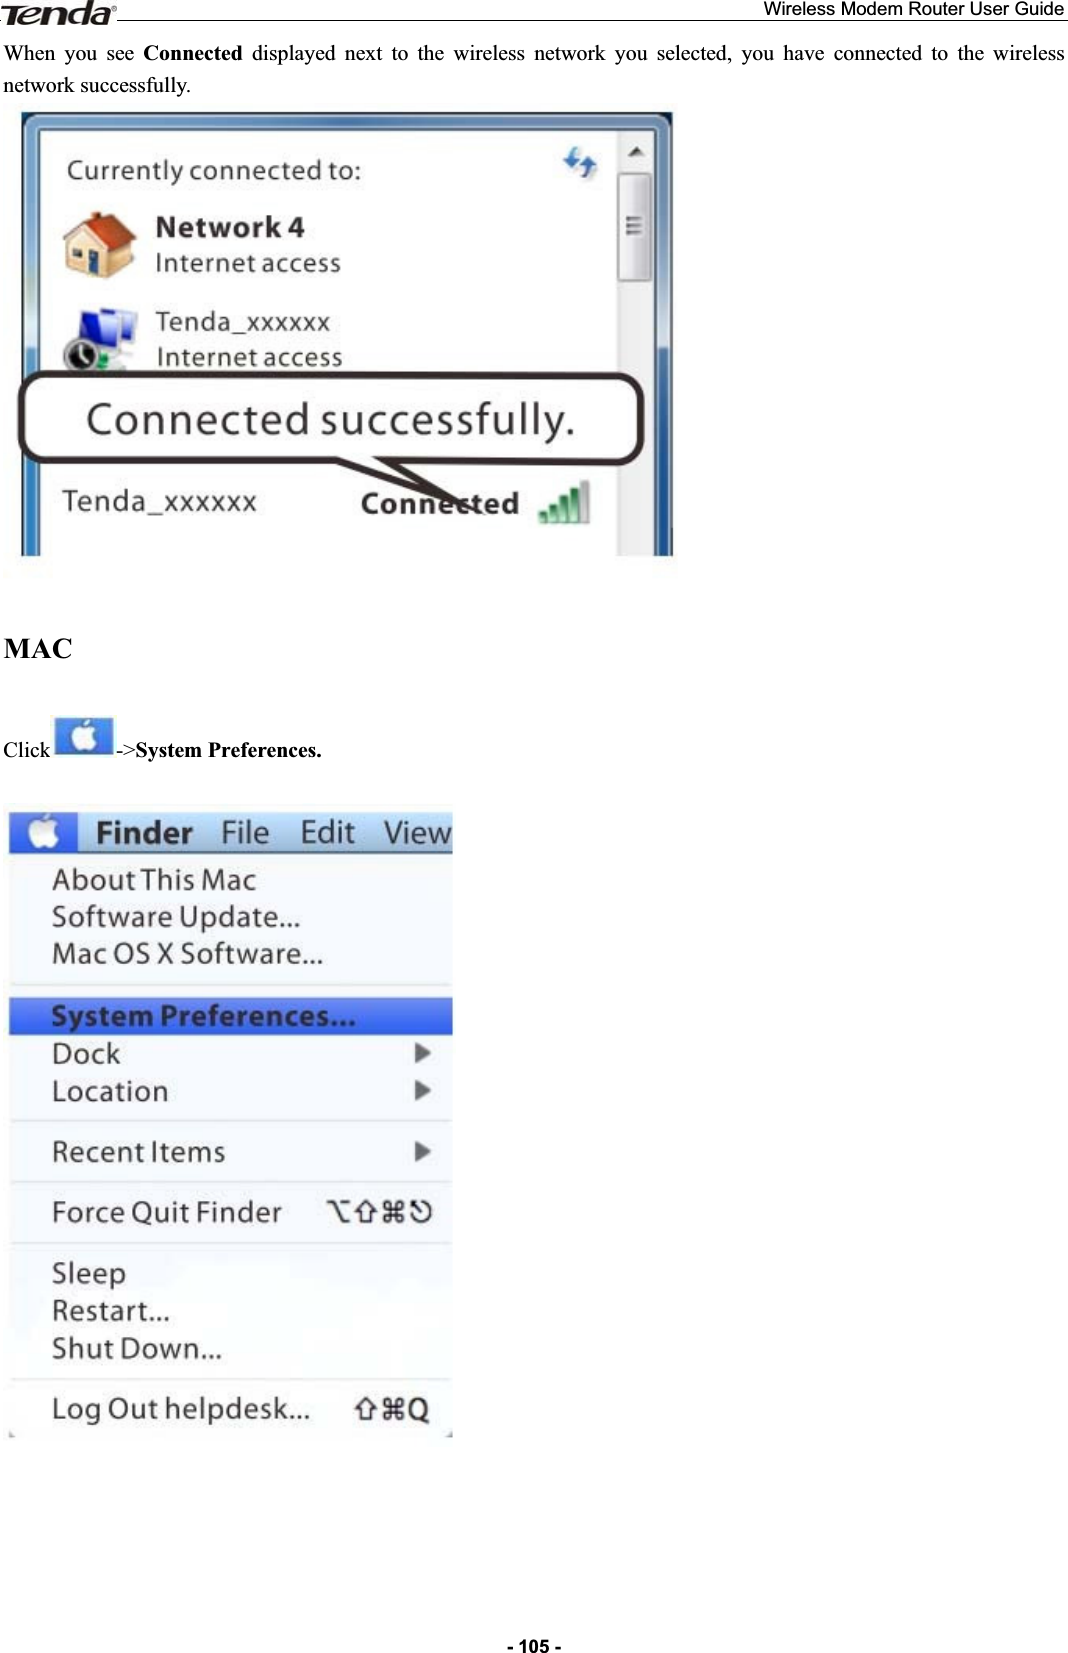 Wireless Modem Router User Guide- 105 -When you see Connected displayed next to the wireless network you selected, you have connected to the wireless network successfully. MACClick -&gt;System Preferences. 